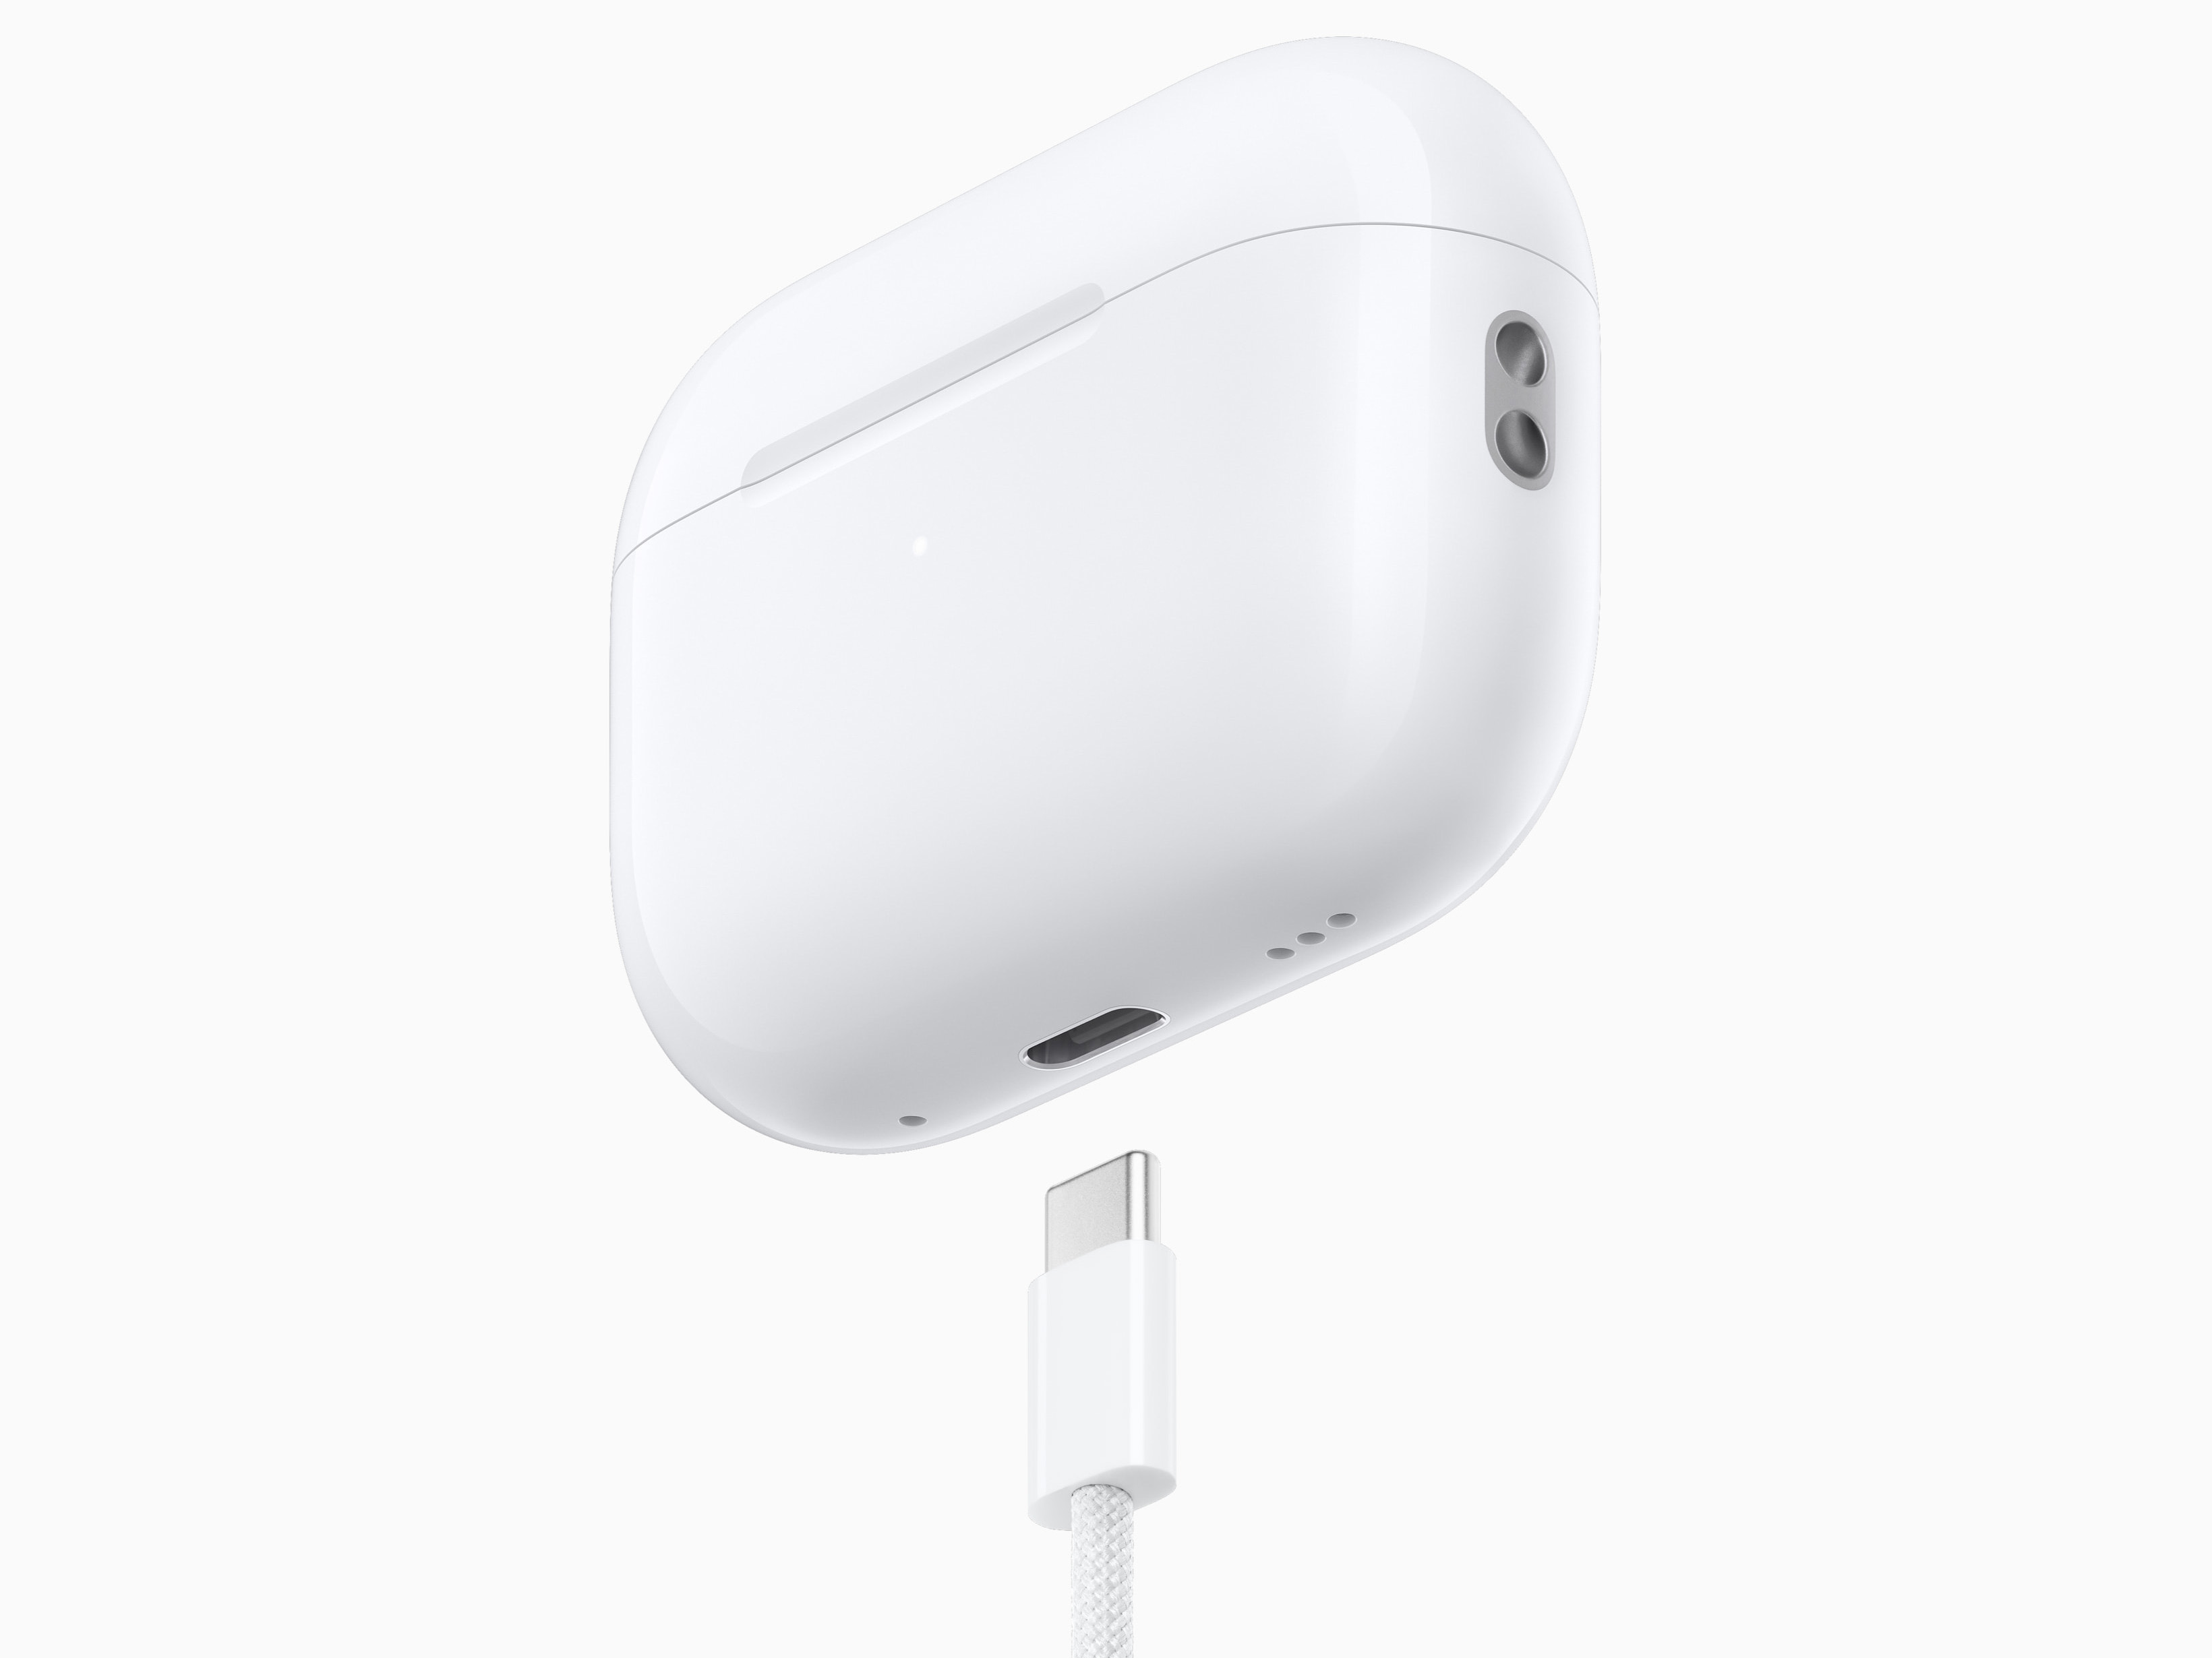 How to charge AirPods wirelessly or with a power cable